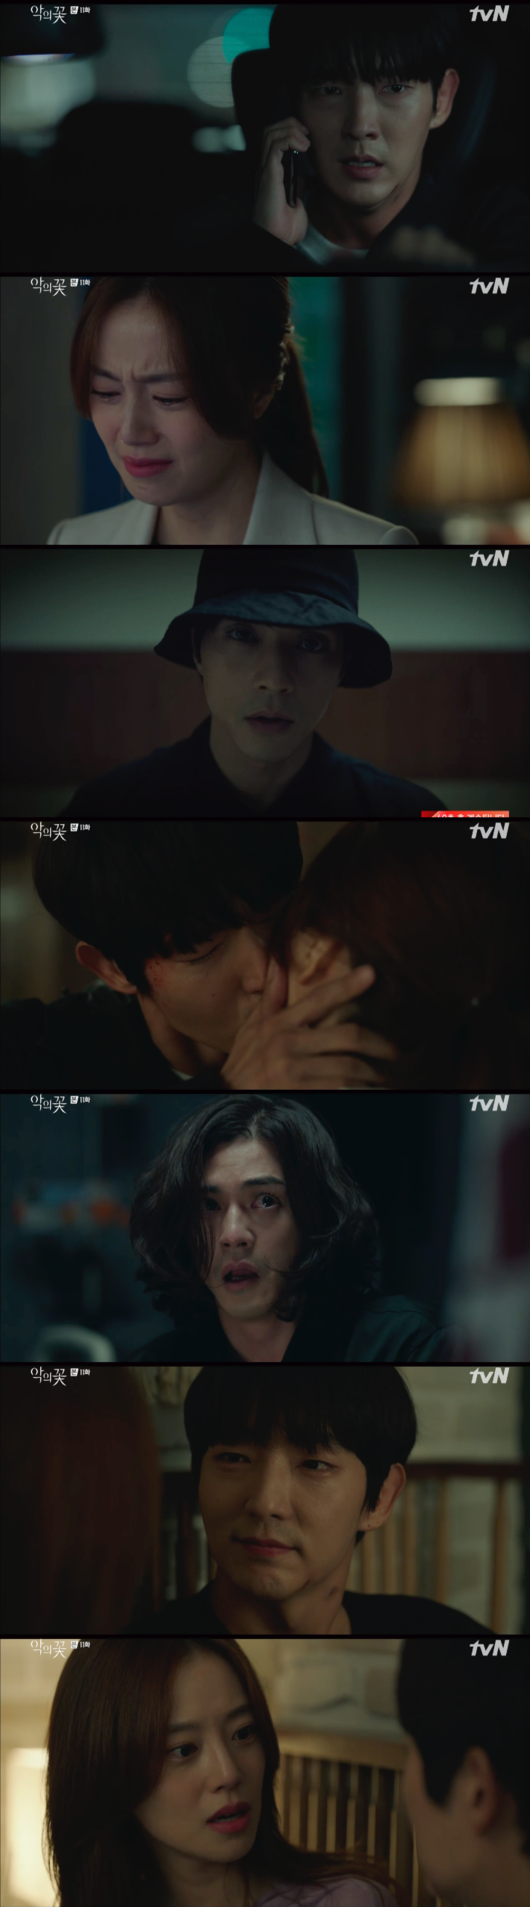 The Accomplice of the Flower of Evil serial killer was Kim Ji-hoon; Lee Joon-gi realised his true love for Moon Chae-won.In the 11th episode of TVN Tree Drama Flower of Evil on the 2nd, Choi Detective (Choi Young-jun), who learned that Do Hyun-soo (Lee Joon-gi) was the husband of Cha JiWon (Moon Chae-won), told Cha JiWon, Did you know?You know all this and youve been controlling us all your way. Youve been fooling us.Then, Lets just say you didnt know anything. The evidence I got proves enough that Baek Hee-seong is Do Hyun-soo. You are Do Hyun-soos biggest victim.Youre not really feeling what you feel, and youre feeling what you feel when youre assimilated to the perpetrator.Cha JiWon said to protect her husband, No, the truth is different. I know. It was helped by the Baek Hee-seong parents. He is never a man to hurt.You just have to watch. Please. Ill prove him. Hell be a spectacle when he gets caught. Serial killer son, psychopath, cop husband.Everyone will throw stones and watch. How can I watch it?Youll blame me now, but youll thank me, and Ill wipe out Yeom Sang-cheols party tonight and arrest Do Hyun-soo tomorrow morning. I cant leave you alone.So just get out of it, and keep your eyes closed until all the situations are over.At that time, Do Hyun-soo told Kim Moo-jin (Seo Hyun-woo) that, If you give money to Yeom Sang-cheol, the second tangent begins. Then you will deal with people.If I cant do it, you have to call the police.Do Hyun-soo took the money and went into the den of broker Yeom Sang-cheol (Kim Ki-moo).He turned over the money and when he was about to get information about Accomplice of his father, serial killer Do Min-seok (Choi Byung-mo), the phone rang to him.Surprisingly, it was Baek Man-u (Son Jong-hak), the father of Baek Hee-seong (Kim Ji-hoon), who called Yeom Sang-chul.When his real son, Baek Hee-seong, came to life, he told Yeom Sang-cheol to kill his fake son, Do Hyun-soo, There are two reasons to get rid of him in front of his eyes.Hes got a job with the police, and hell get twice the money he received from Do Hyun-soo. Hes a man who hides his identity.So Yeom Sang-cheol tried to kill Do Hyun-soo. Im not sleeping, so Im afraid. Do Hyun-soo will never give up my identity.He was afraid that he would never let me live, and Baek Man-u said meaningfully, Thats not true, I dont make it that way.At that moment, Do Hae-soo (Jang Hee-jin) came to the house of Baek Man-woo, who said, I only recently met Hyun-soo. I heard that he was unconscious.I heard that he felt sorry for the situation, and he said he was good people. He showed me the bracelet at the hospital and said, Get me a list of hospital volunteers from 1999 to 2005. I think you will be nervous about the re-enactment of the serial murders.Hyun-soo is not at all. It has nothing to do with his fathers crime.We believe in Suspension, but what does this bracelet have to do with it? Do Hae-soo said, A man came to his fathers funeral home.The man was his father, Accomplice, wearing the bracelet. If I ever saw that face again, Id recognize it.Baek Hee-Seong, who was hiding, stared at the sea. Accomplice was short only on the left fingernail.Just like biting that hand. Baek Hee-seongs left nails were exceptionally short.At the same time, Do Hyun-soo was in danger of dying. At the moment of his death, Cha JiWon (Moon Chae-won) appeared and saved Do Hyun-soo, but he was hit by Yeom Sang-cheol.Do Hyun-soo, who saw this, untied the strings with superhuman power and saved Cha JiWon. Angered, he is like killing Yeom Sang-cheol.Drying this, Cha JiWon told Do Hyun-soo, Choi Detective has evidence that he is Do Hyun-soo. Go as far as you can tonight. No home.Go to a place I cant find, and dont show up before me again, and youre not going to be your specialty to run and hide, and youre going to live in prison for your life instead of your sister.After all, Do Hyun-soo escaped the scene and ran away. Cha JiWon ran back to Do Hyun-soo and said, What the hell is wrong with me.You said youd let me run. Do Hyun-soo asked, Why do you know all about it and I dont know why?Cha JiWon said, I know all about you, but I do not really know why you told me to run away.Do Hyun-soo, who finally felt emotion. Im sorry, Im sorry. I hurt you so much. Why did you do it.You know all about it, Cha JiWon said, holding him, and Do Hyun-soo said he wanted to go home, and Cha JiWon said, Lets go home.Well start over there, whatever it is, he said. They went home and kissed him.At that time, Yeom Sang-cheol fled the police; the Accomplice photo in his hand contained a Baek Hee-seong.Do Hae-soo was afraid of her mother, Gong Mi-ja (Nam Ki-ae), for fear that Do Hae-soo would remember her son.Why was it that day that I was hit by my car, and he wouldnt look at me when he was dead, and he was trying to kill me by using his son.I did what I told him. I threatened to kill my mother Father. I was so scared. I didnt want to. Trust me.Father, will you protect me?Before being caught by the police, Do Hyun-soo wept at Cha JiWon, telling her past. Cha JiWon said, I was waiting for you when I came out of the library late at night.This person really liked me. You love me. I feel that way. Do Hyun-soo confessed, I love you.Cha JiWon said: Tomorrow, many people will define and judge who they are, dont forget any moments.Youre a warmer person, said Do Hyun-soo, youre a weirder person than me. Support is the least explained part of my life. Unreal.Thats ridiculous, she smiled.The next morning, Choi Detective came to catch Do Hyun-soo and Cha JiWon grabbed his hand.a flower of evil